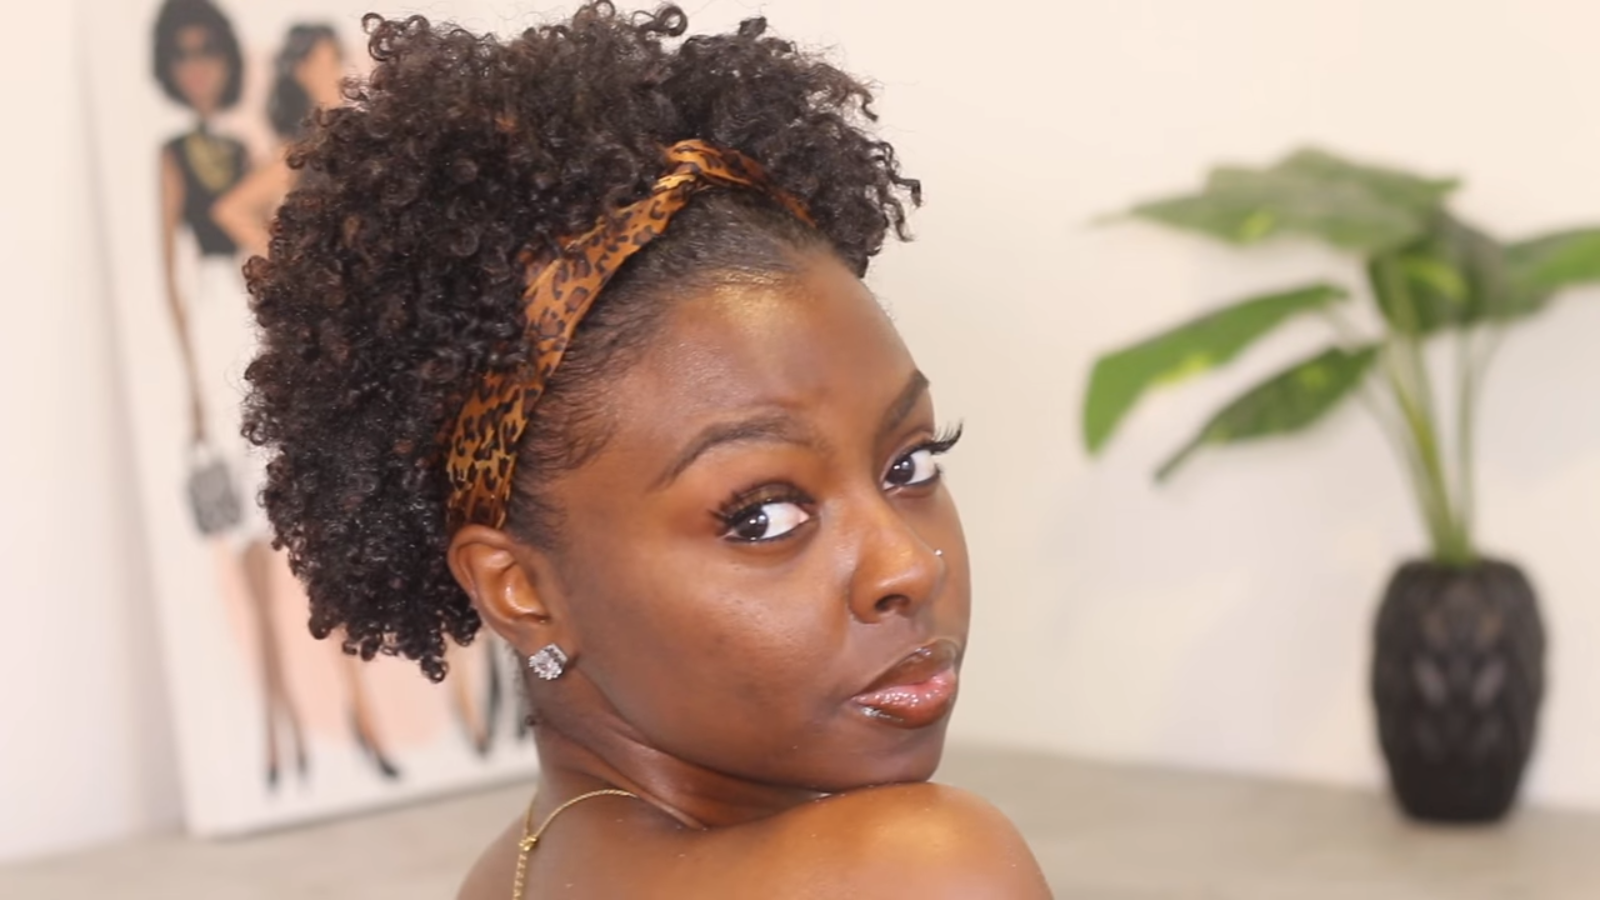 Bet Your Short Natural Curly Hair Never Look So Amazing After A Wash & Go ⋆  African American Hairstyle Videos - AAHV